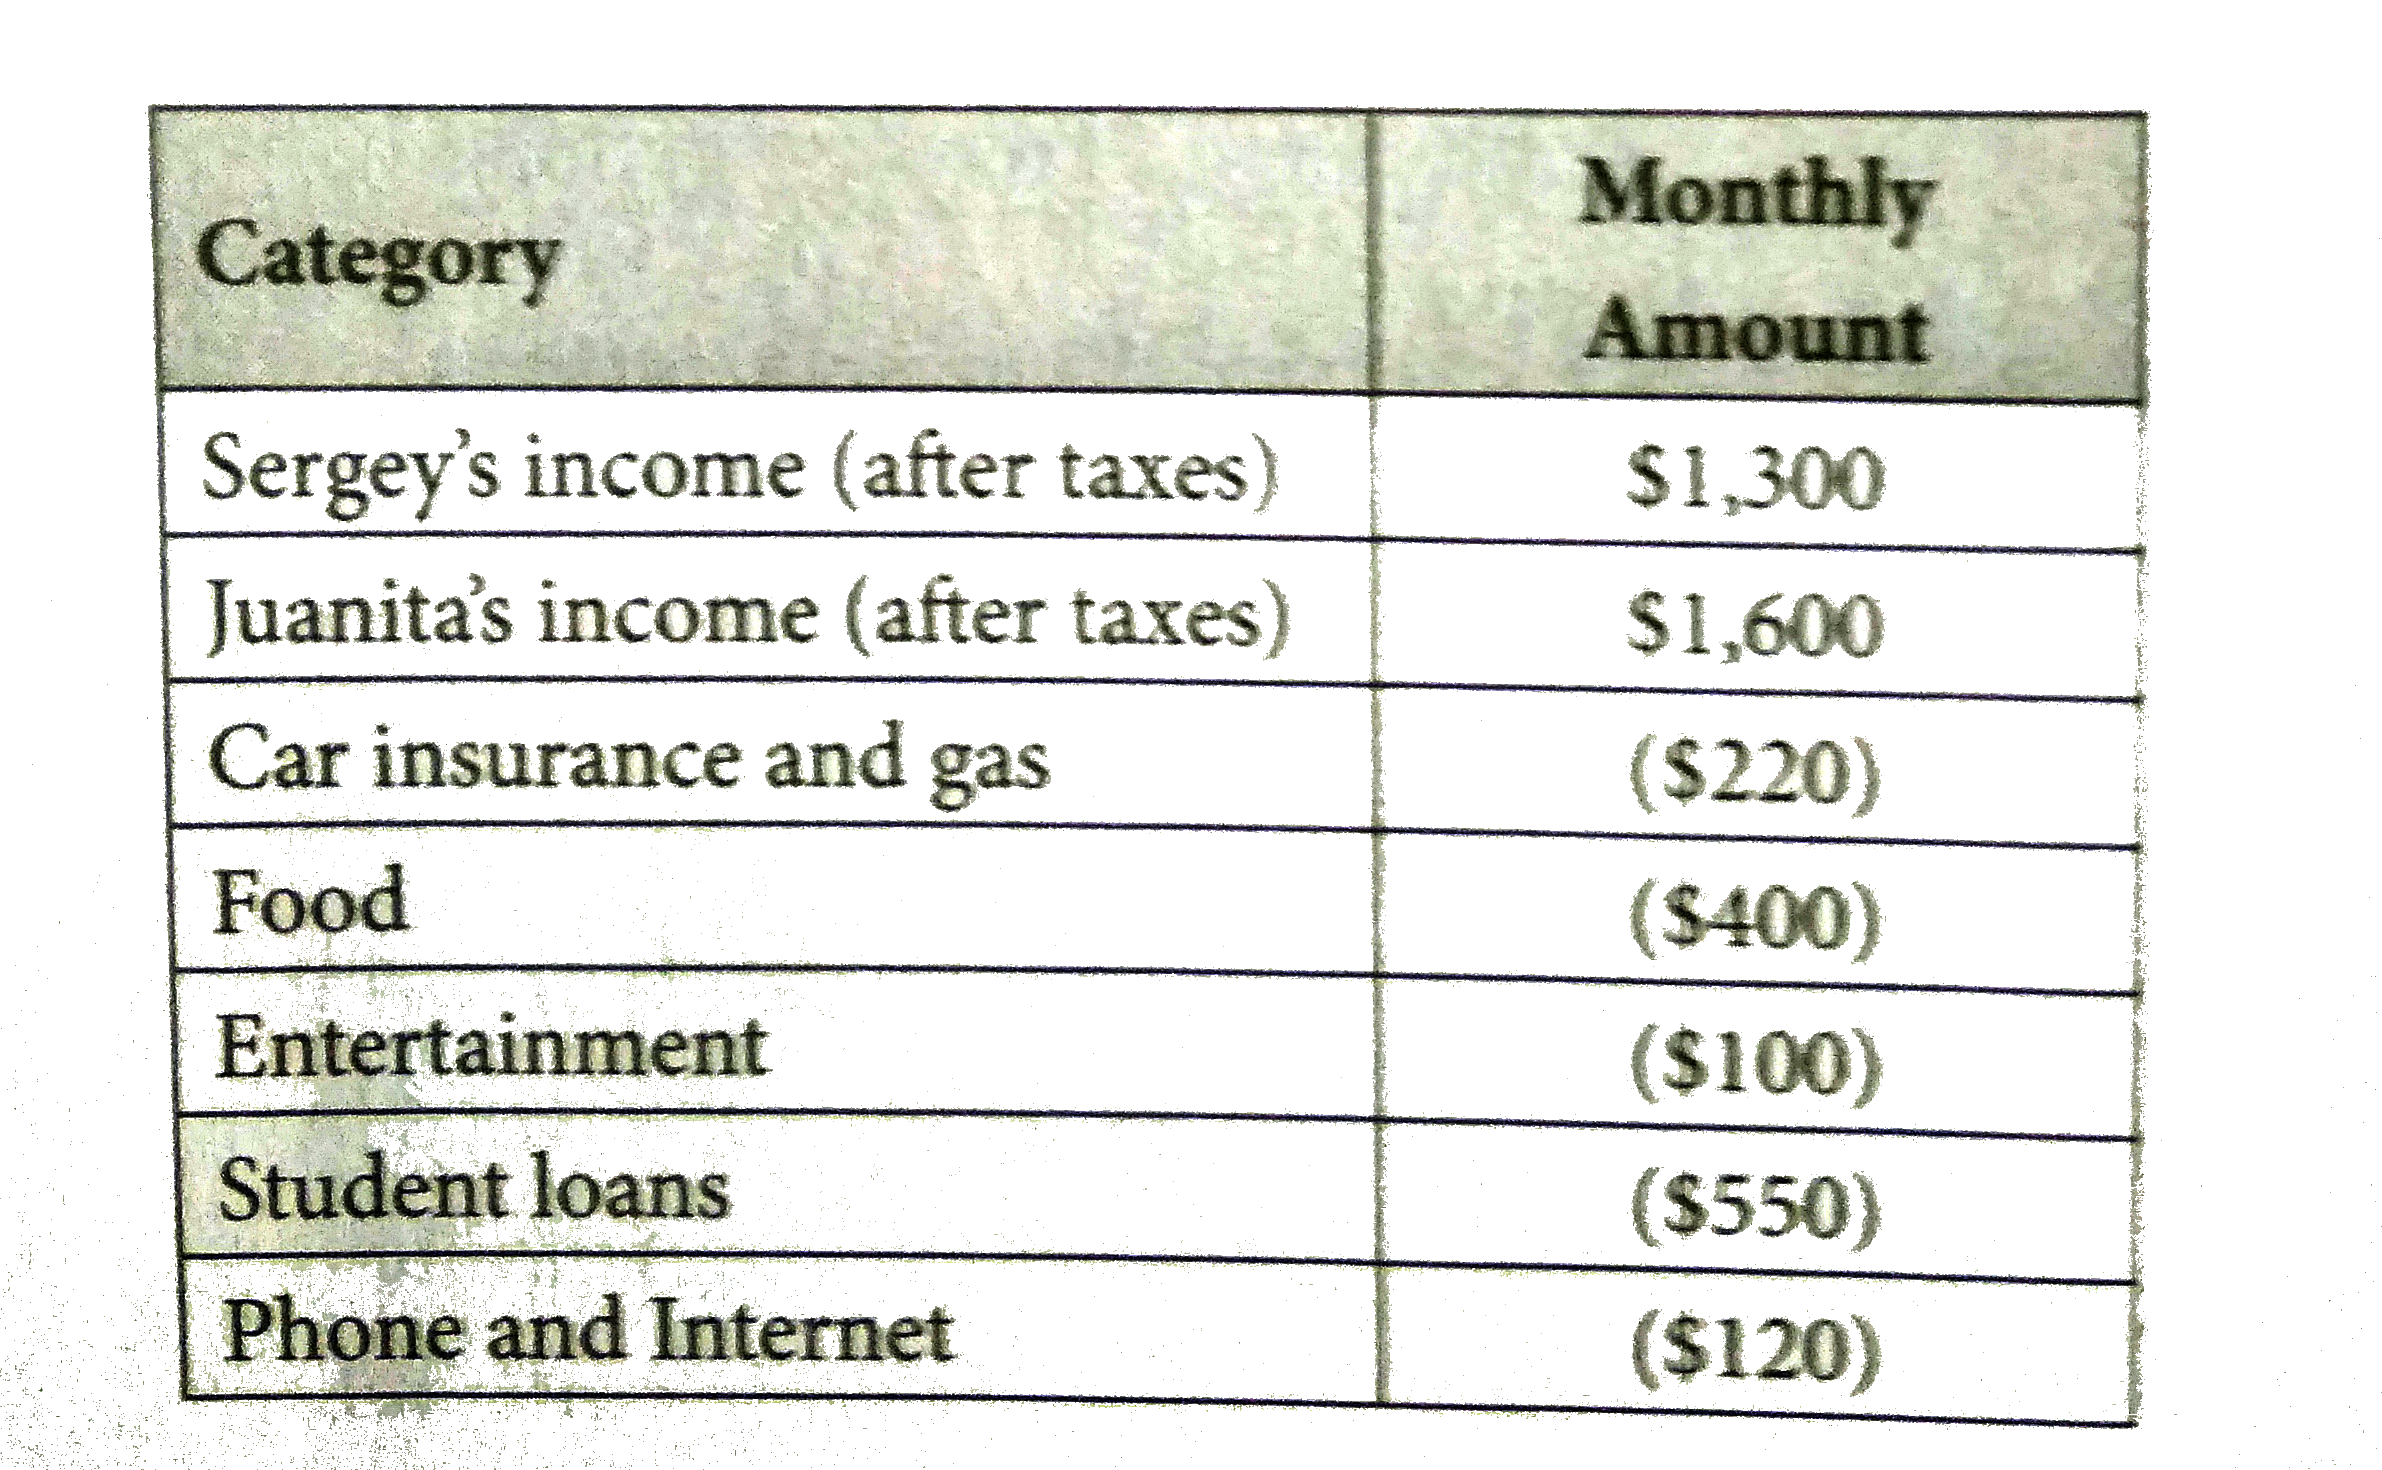 In preparation for buying  house, Sevice and juanita draft a budget to see how muxh they can afford. Their monthly spending and income are shown in the table. Numbers in parentheses indicate express (money being spent), numbers without paretheses indicate income  expenses (money bing spent): numbers without paratheses indicate income (money being earned). Sergey and Juanita will not buy a house unless they can save atleast $400 a month after all expenses, including the new mortgage payment and properrty taxes, are paid.      The couple would like to buy a house that costs $230,000, for which the monthly mortgage paymetn would be $730, and the annual property taxes would be 2.5% of the purchase price. By what percent could Sergey and juanitacut their monthly food spending in order to buy this particular house and meet their criteria for purchasing a house? (Ignore the percent sign and grid innn your answer as a whole number. )